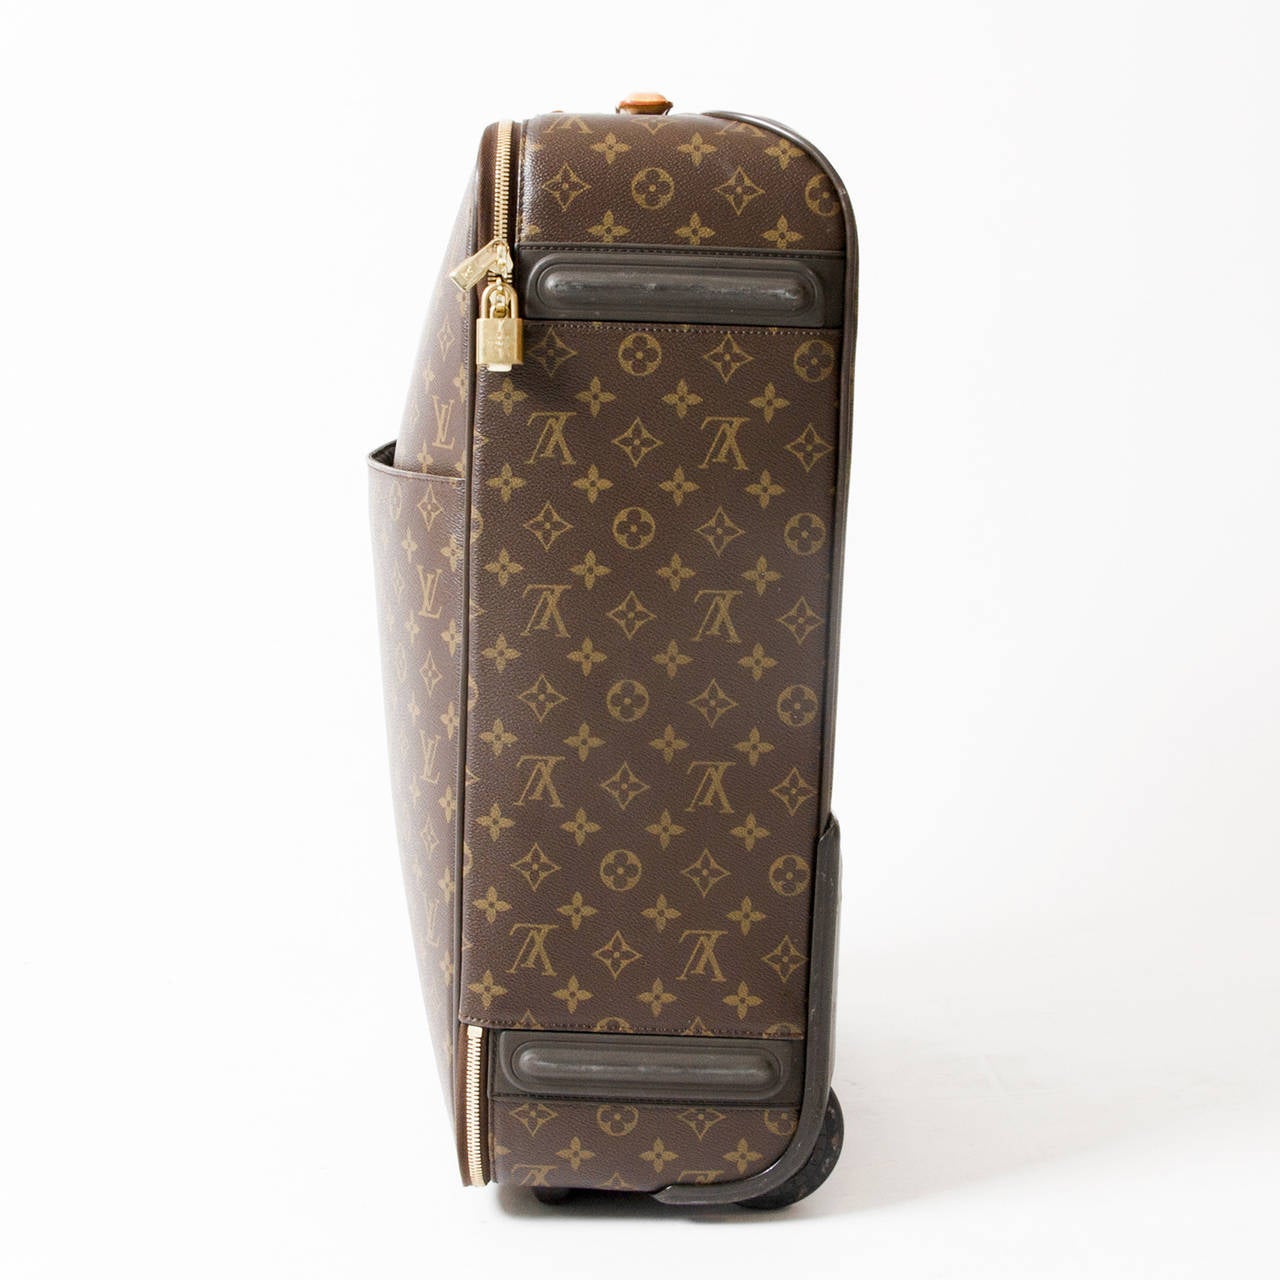 An classic Vuitton style, the Pégase 55 moves smoothly (and noiselessly) from business to pleasure and back again. This cabin-sized case holds everything in impeccable order, thanks to multiple compartments and  pockets. In Monogram canvas, with